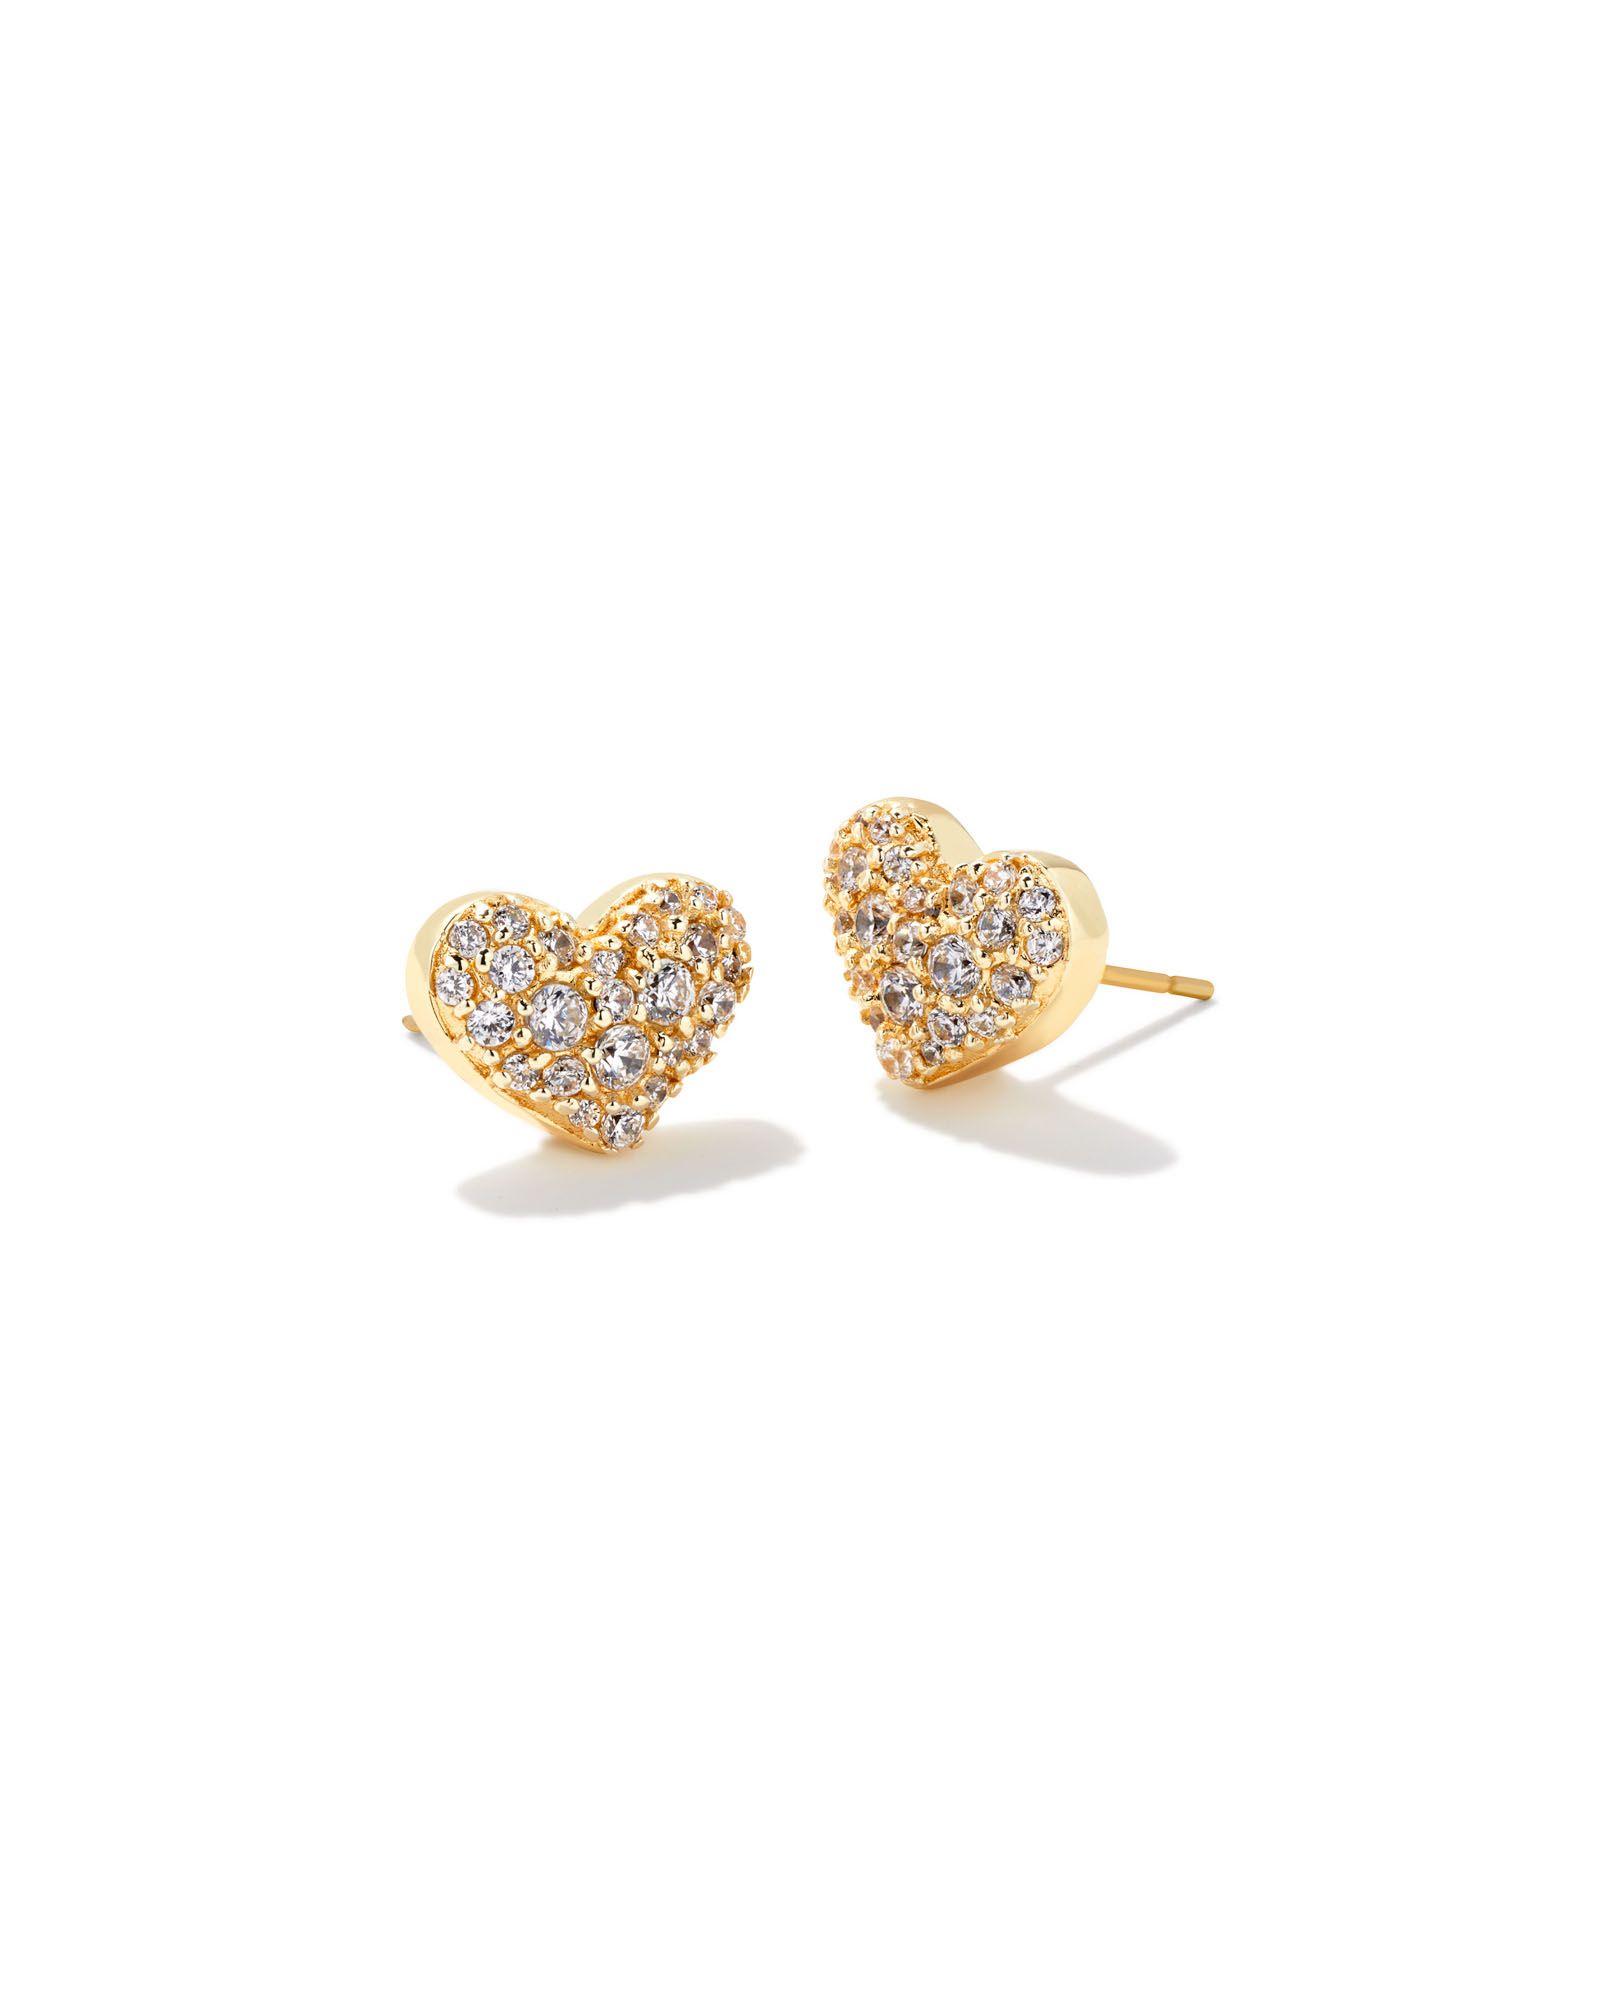 Ari Gold Pave Crystal Heart Earrings in White Crystal | Kendra Scott